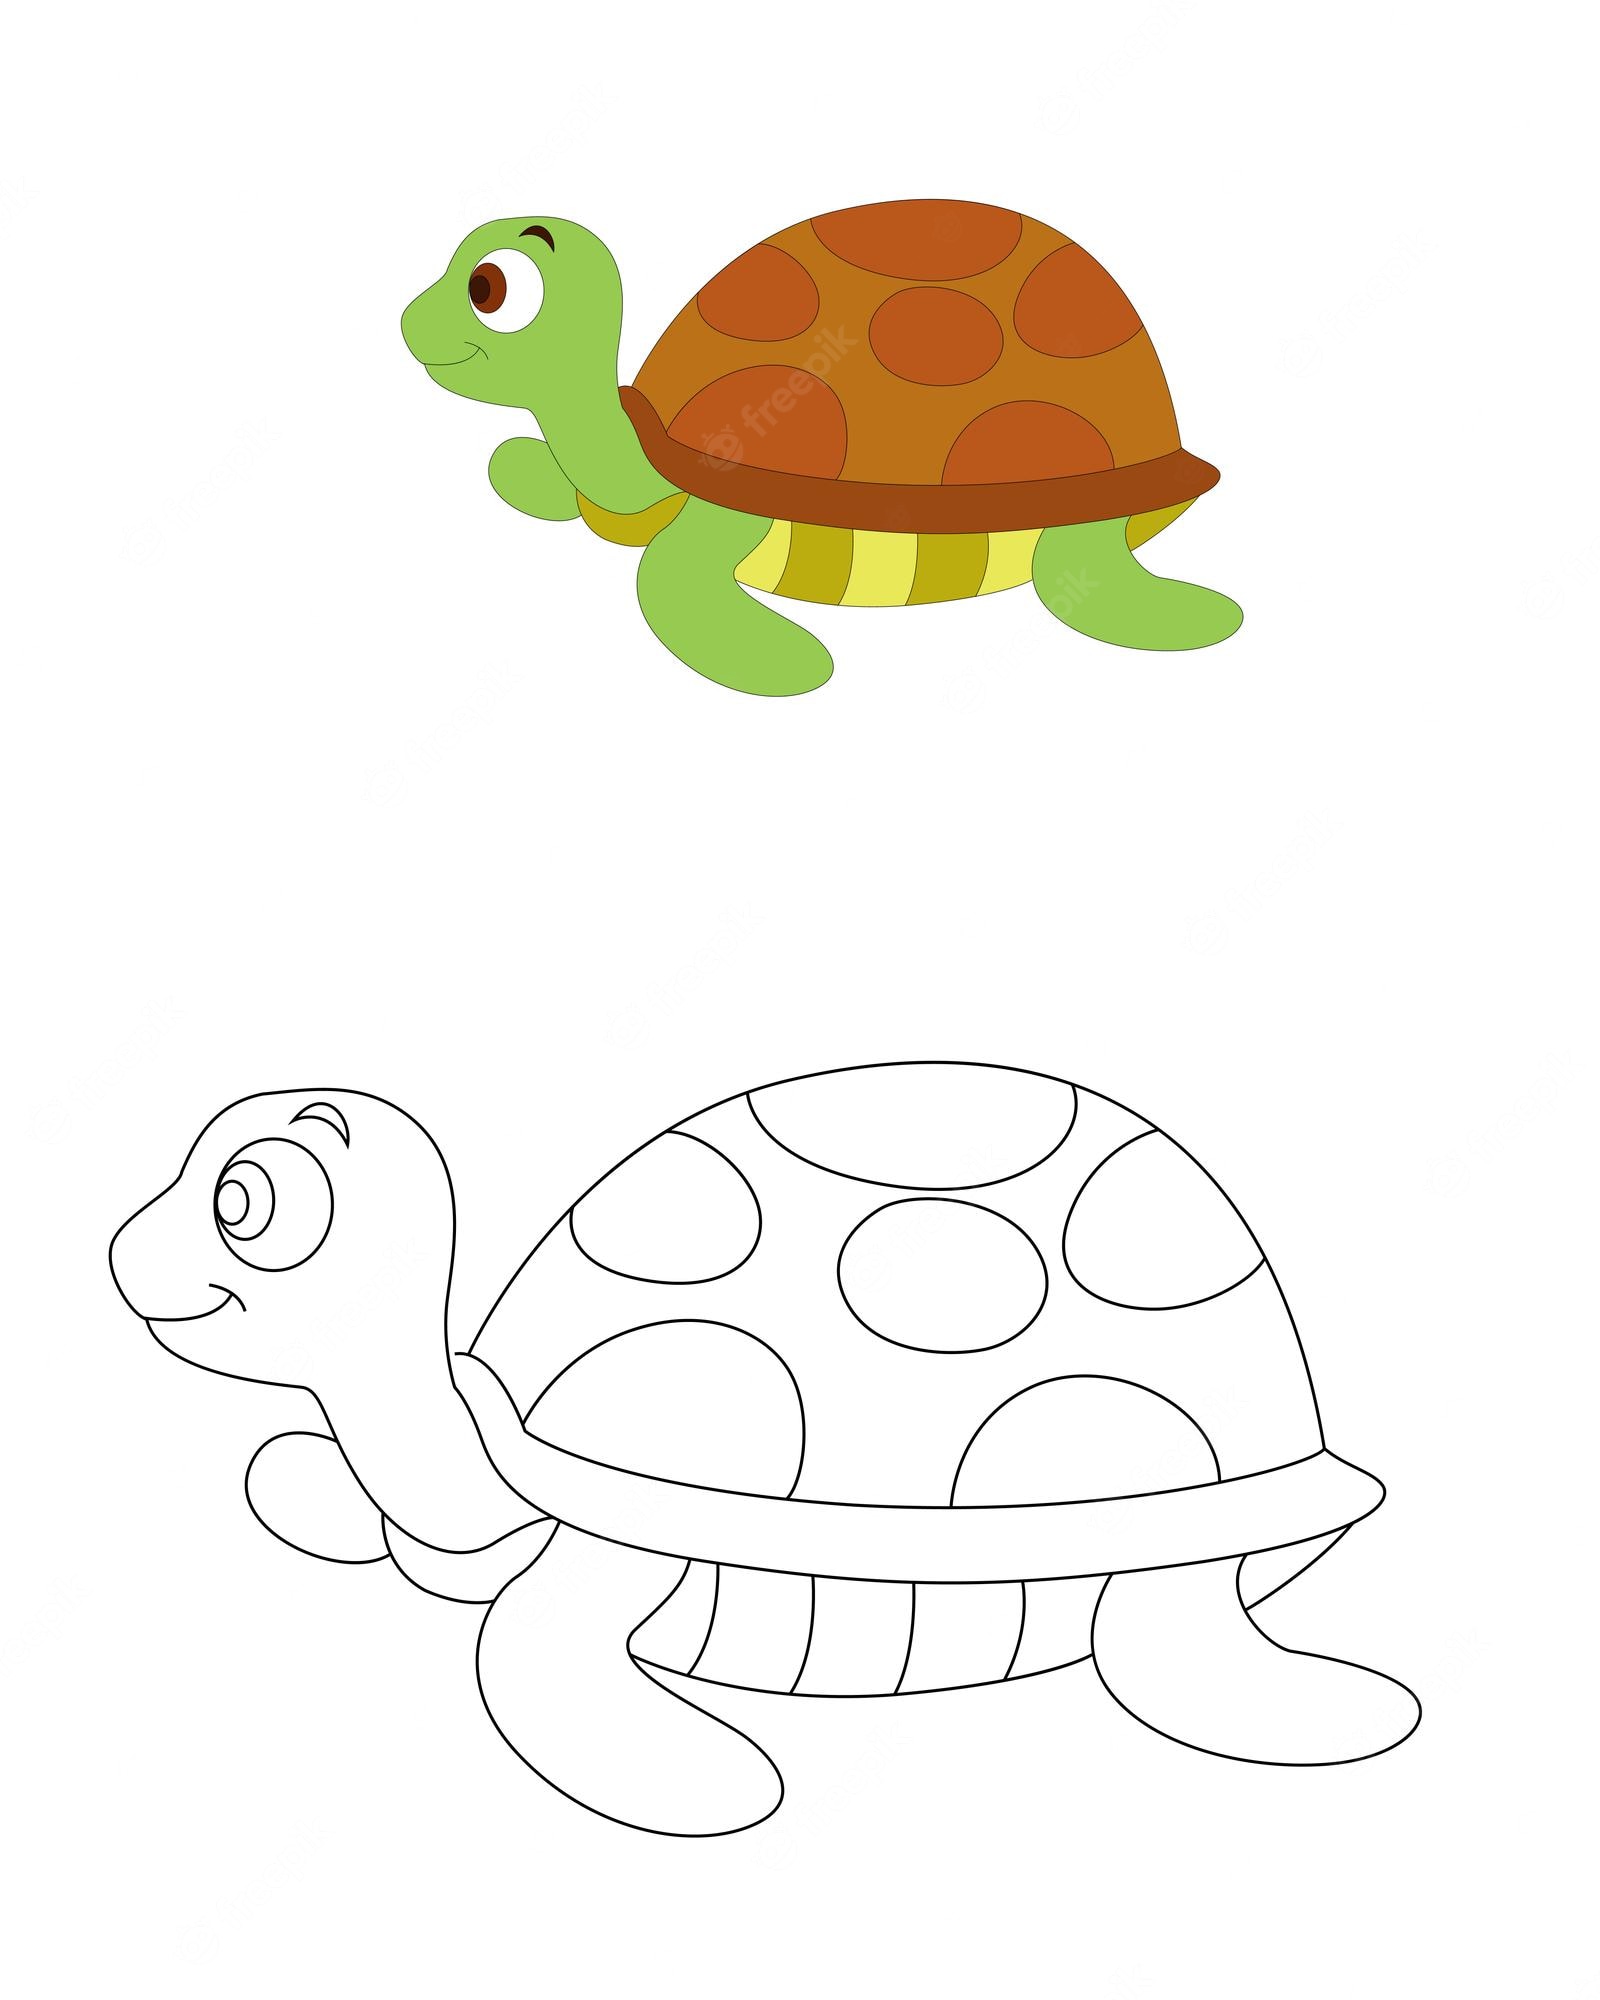 Easy Drawing Tutorials for Beginners & Kids - EasyLineDrawing | Easy  drawings, Tortoise drawing, Drawings